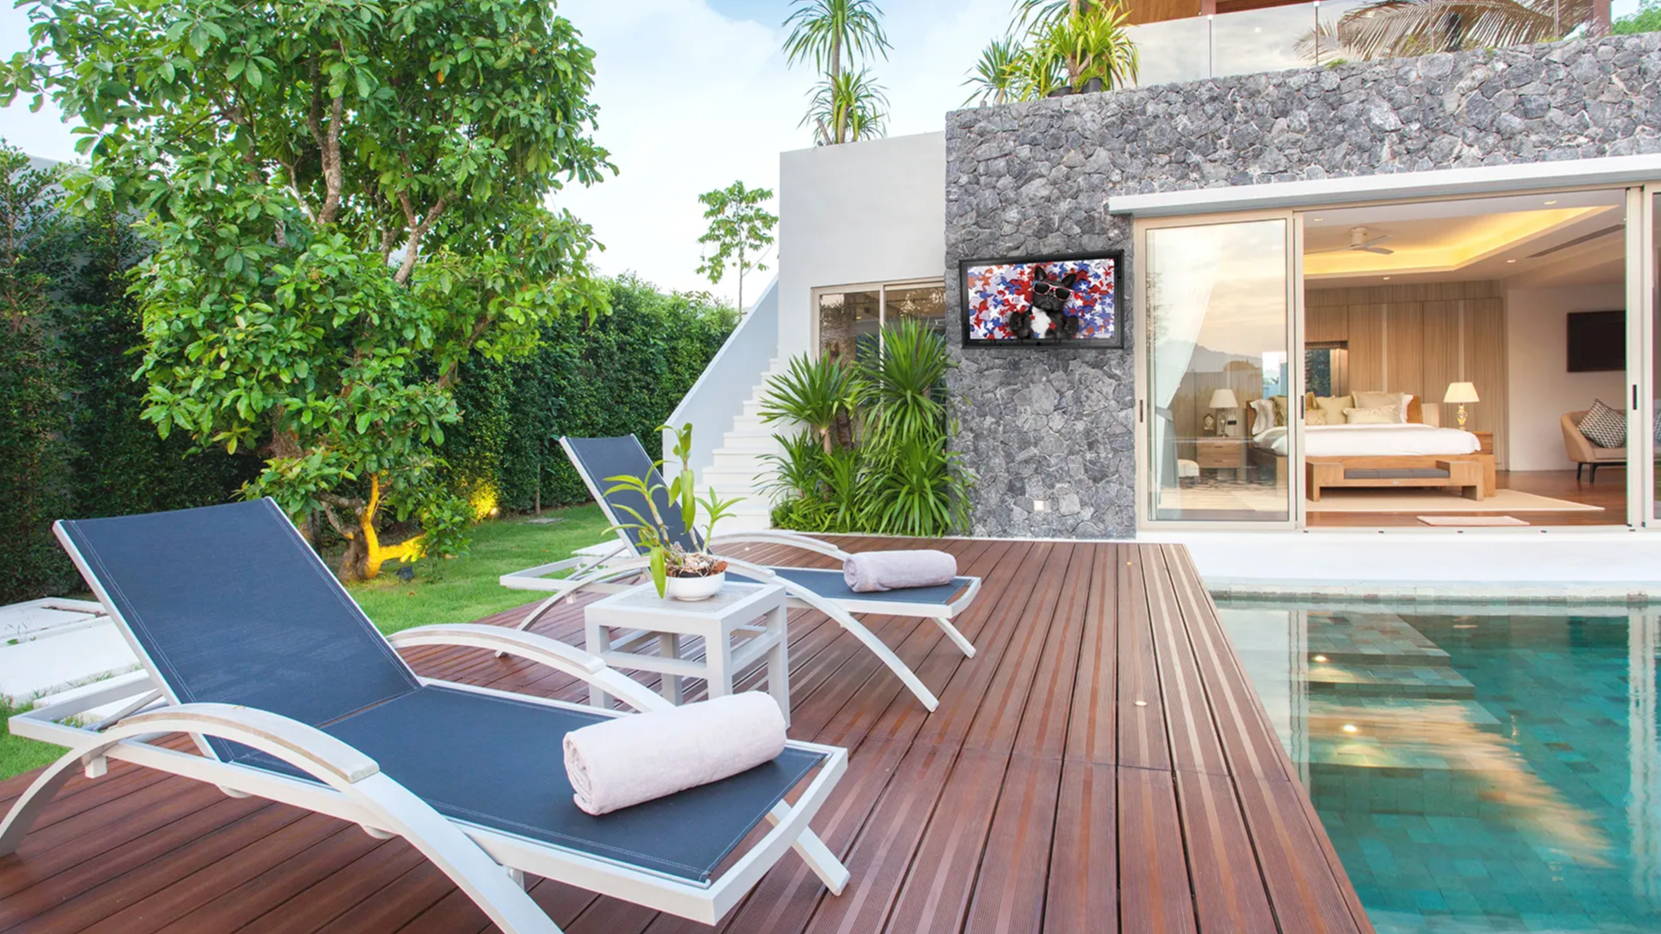 Outdoor TV by pool for rain, storm, theft, bug defense and more